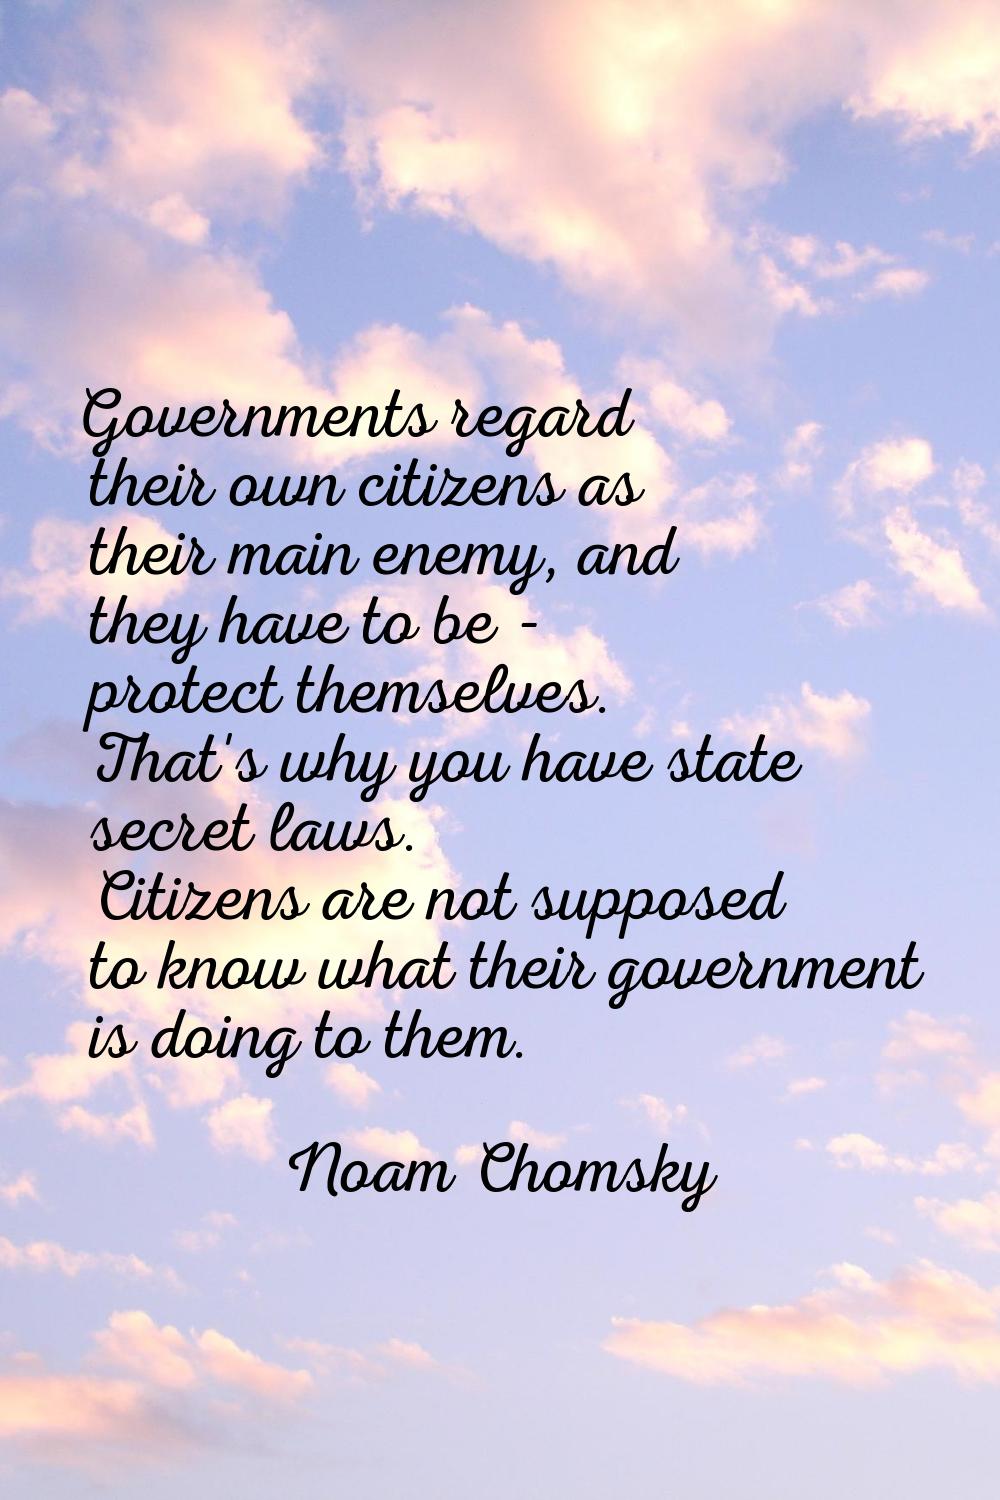 Governments regard their own citizens as their main enemy, and they have to be - protect themselves